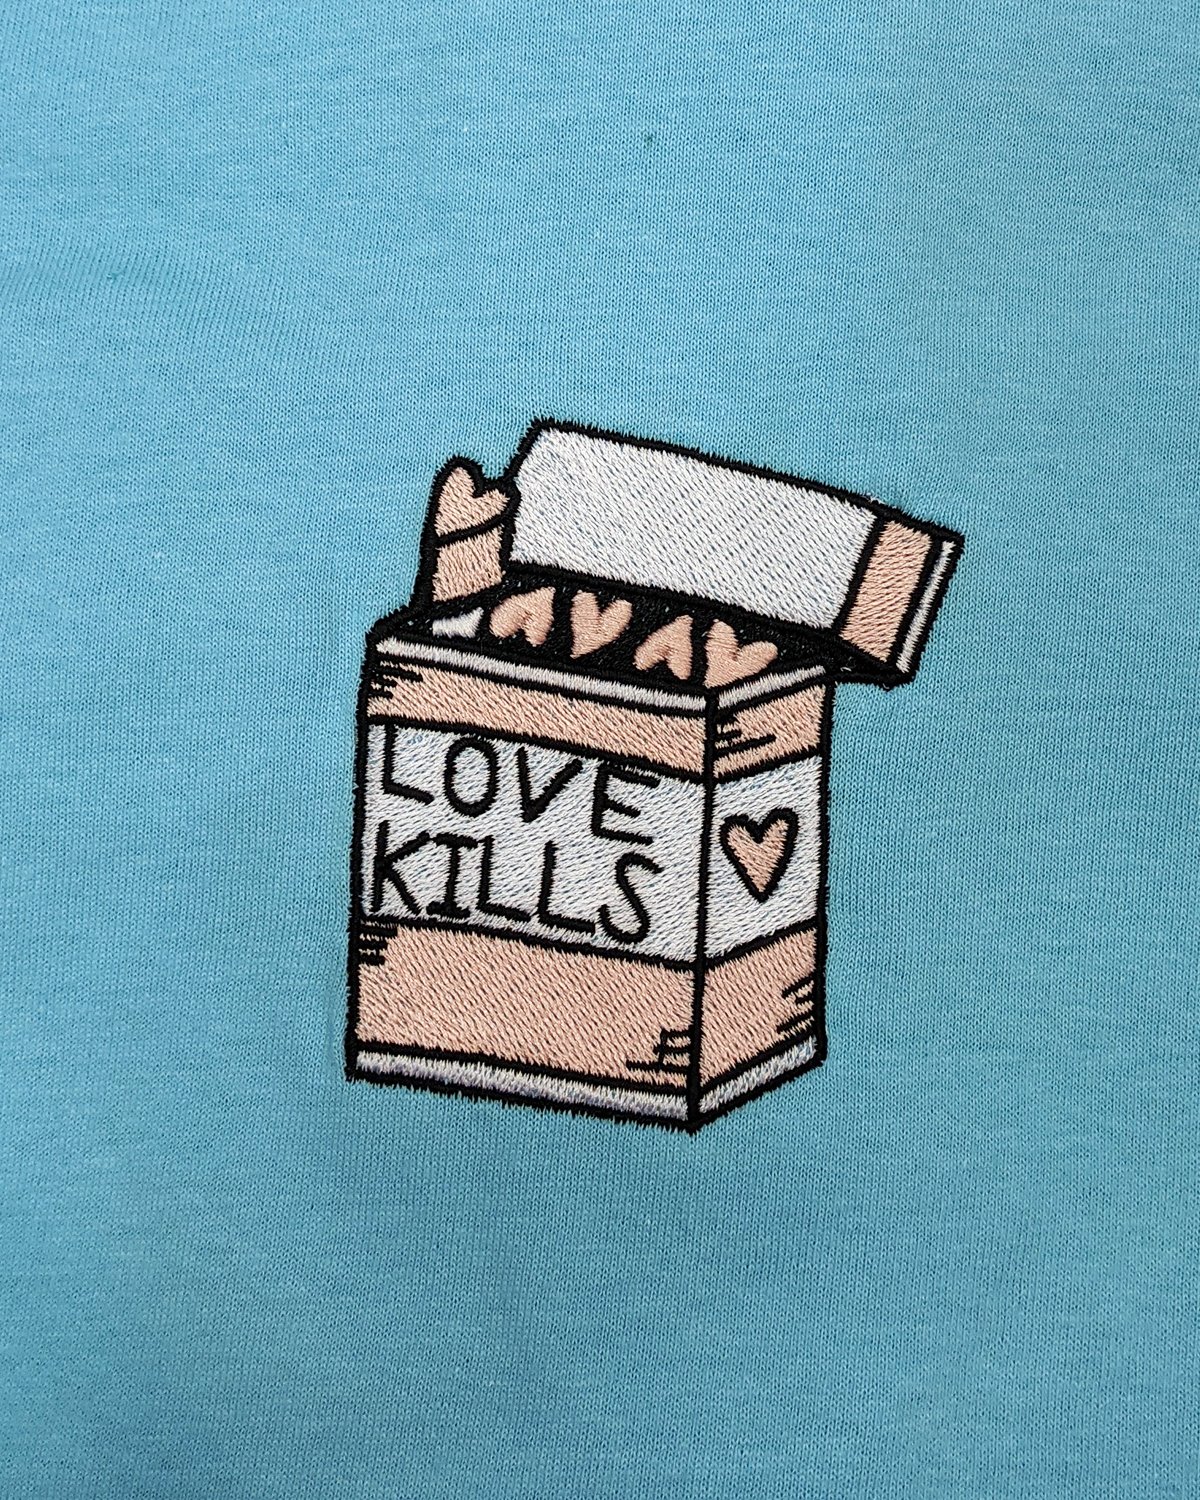 Image of CATCALL 'Love Kills' Embroidered T-Shirt in BLUE